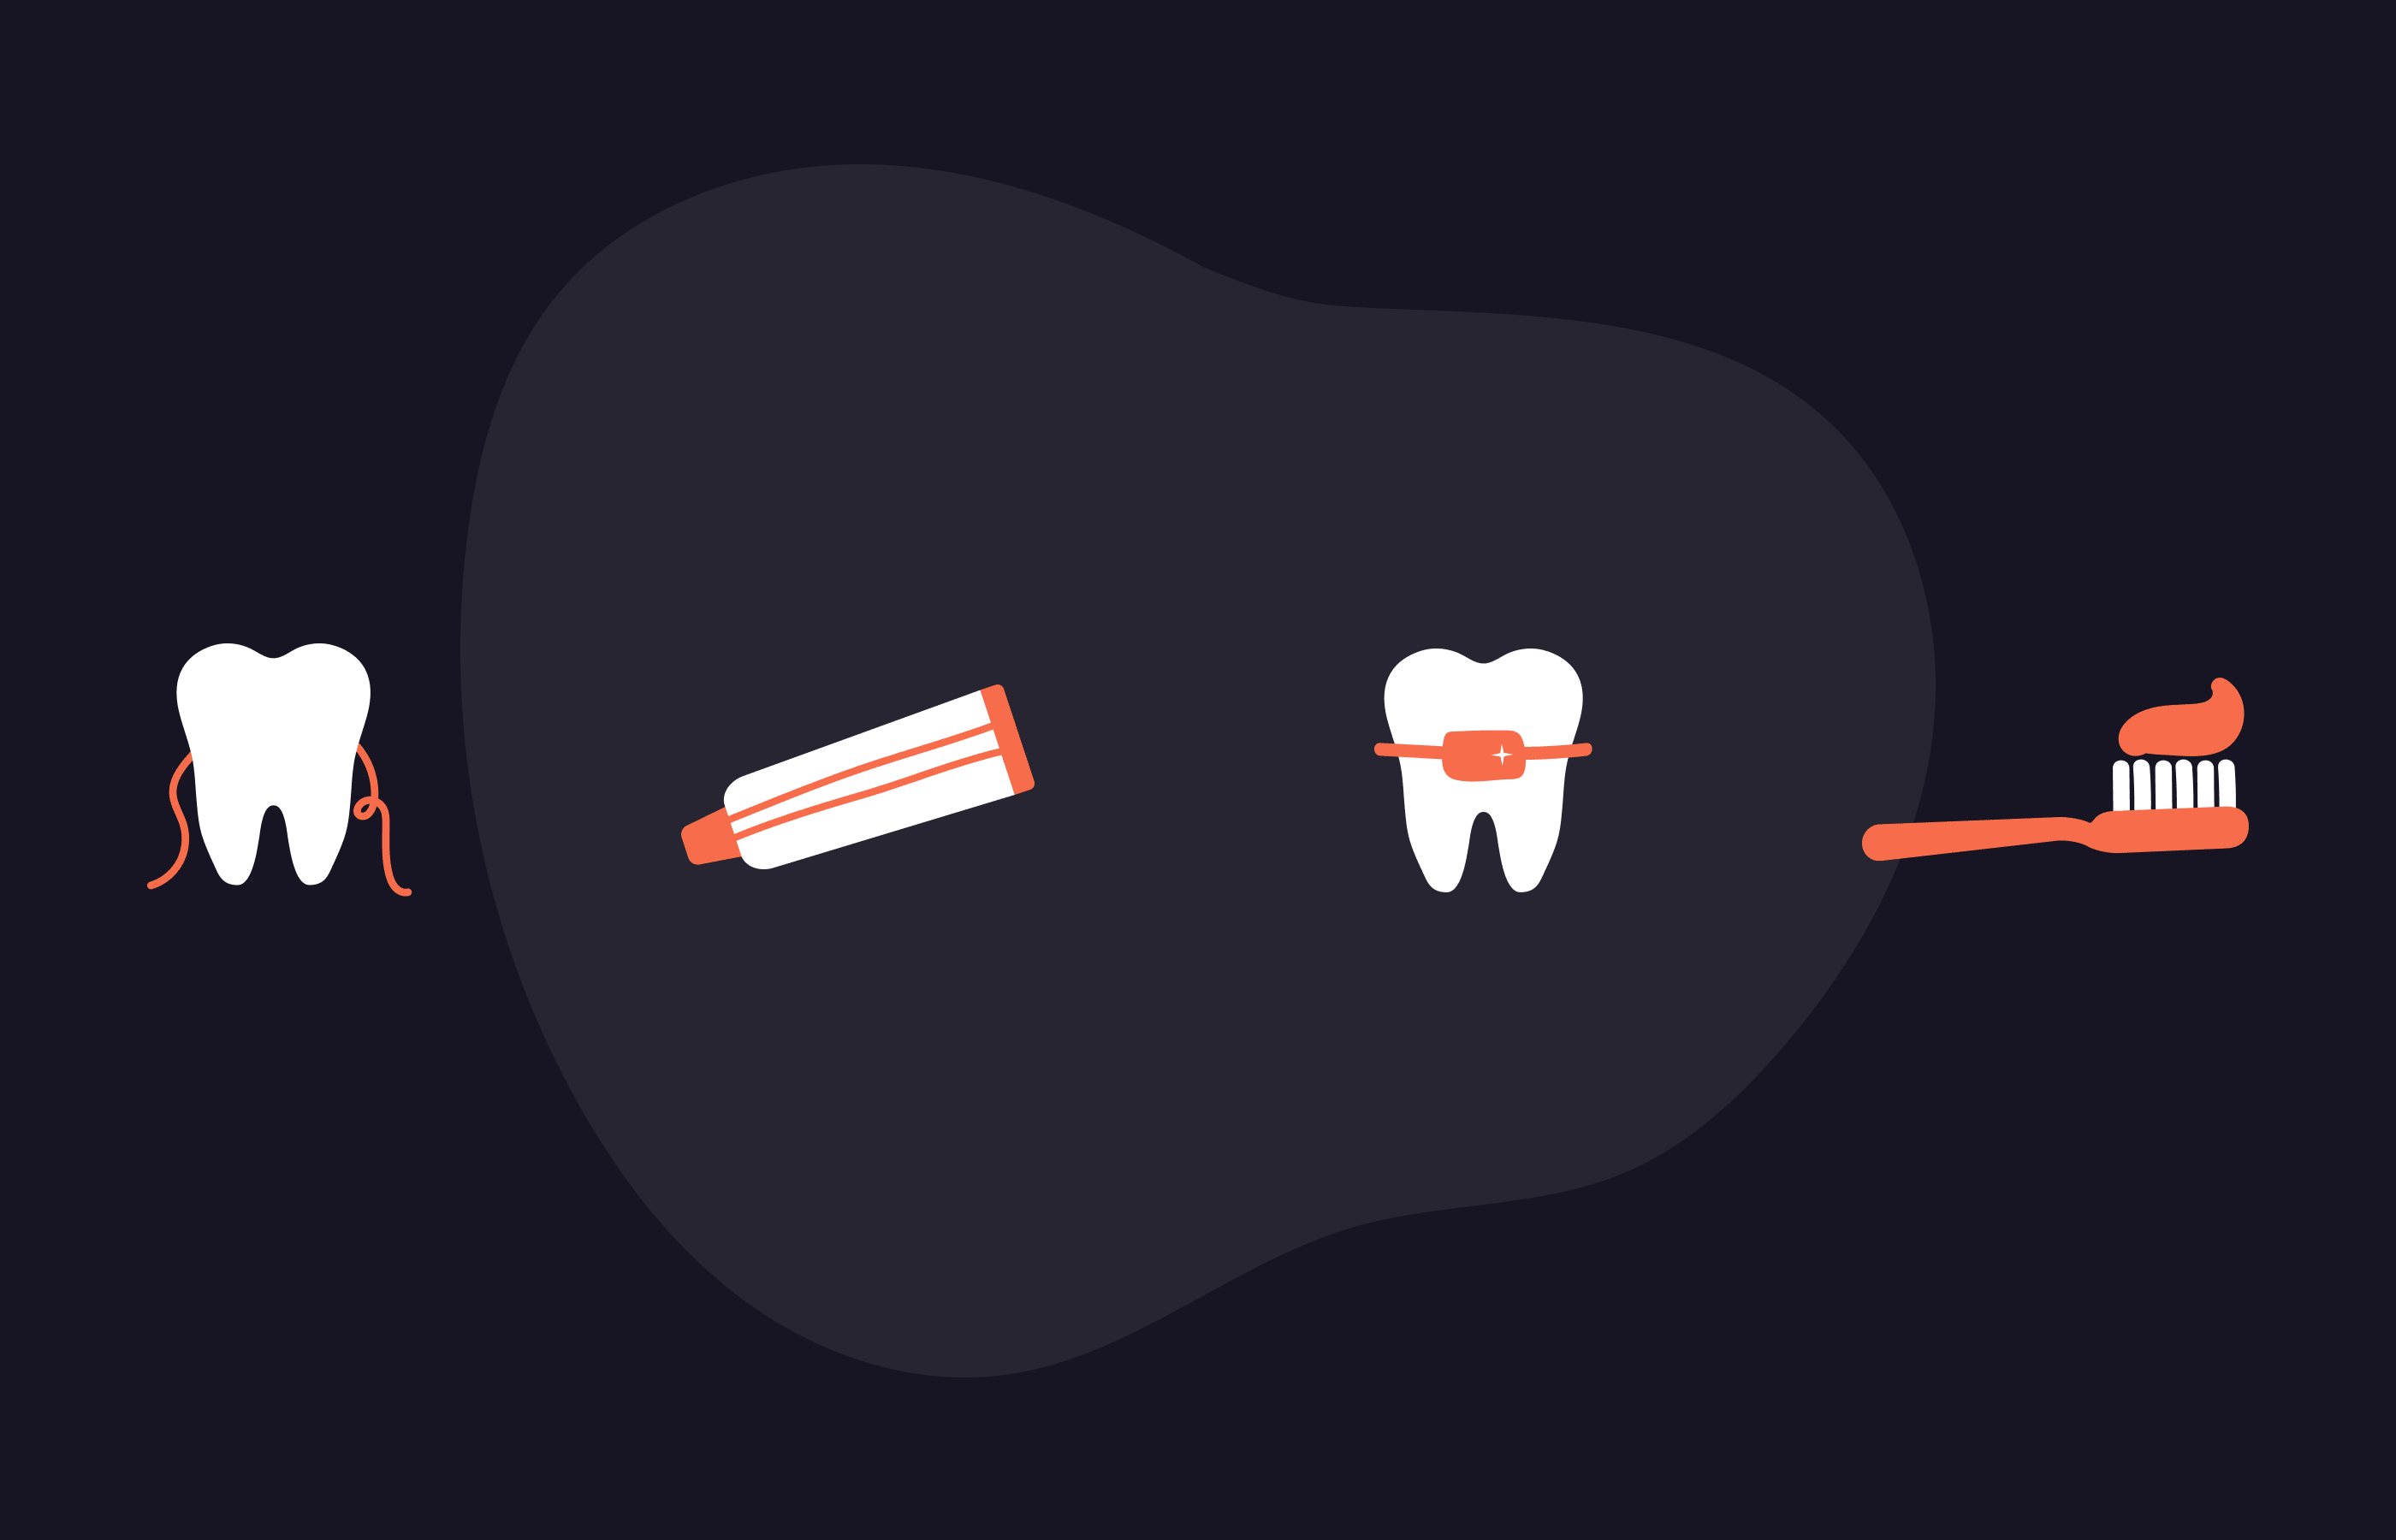 An illustration showing four elements of oral hygiene: a tooth with dental floss, a tube of toothpaste, a tooth with braces and a toothbrush with toothpaste.